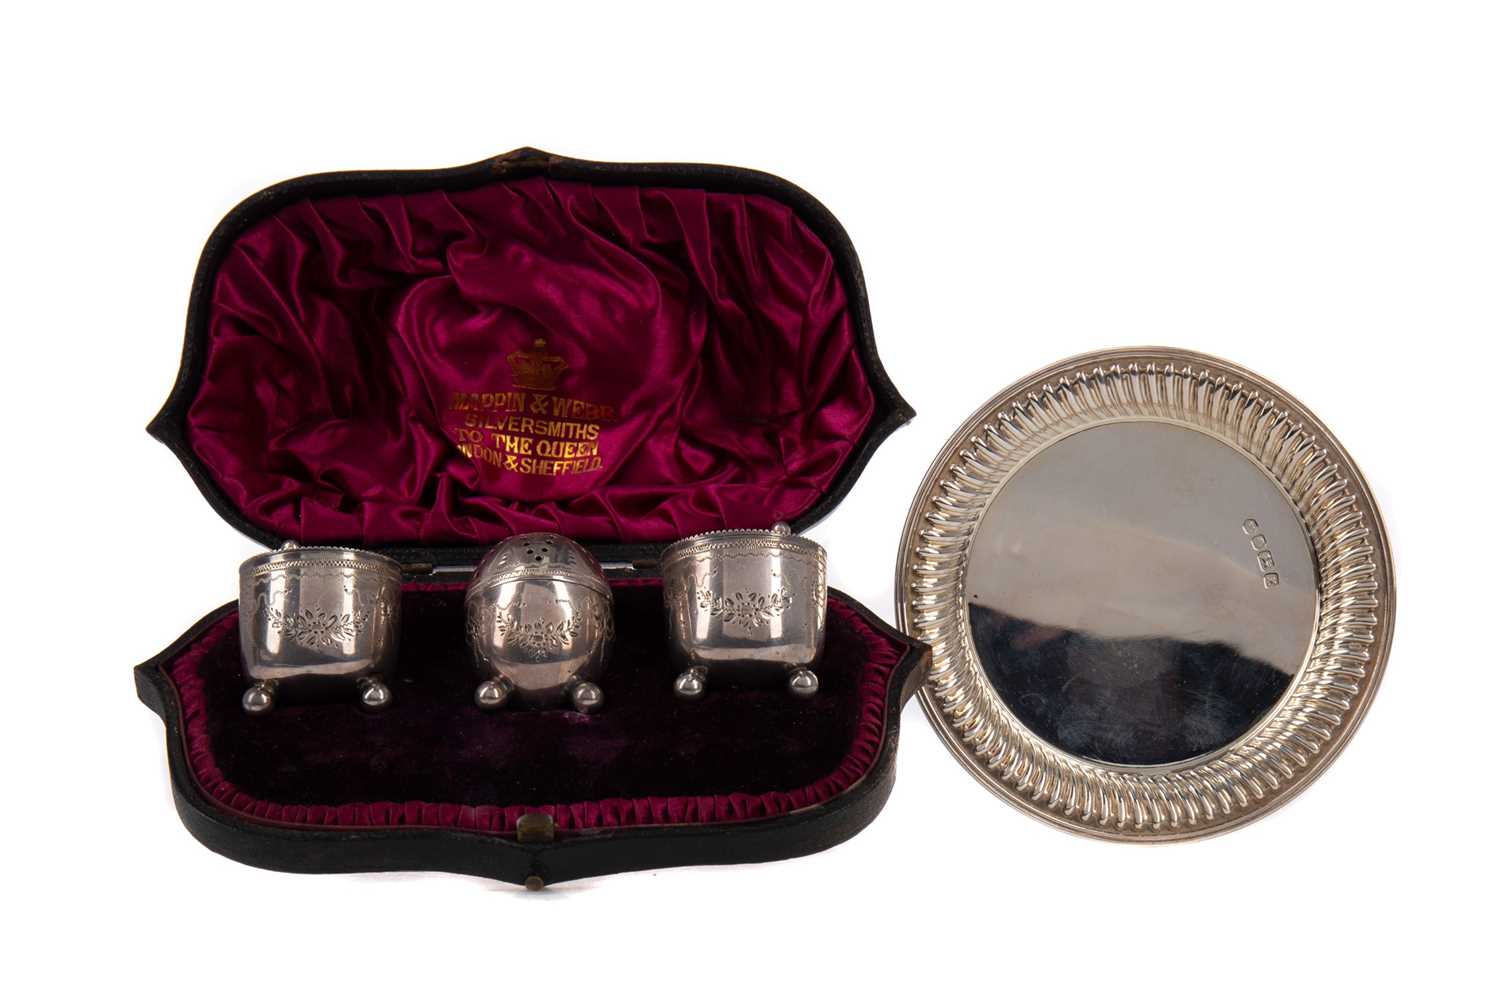 Lot 458 - A VICTORIAN SILVER MUFFINEER SET, ALONG WITH A PIN DISH